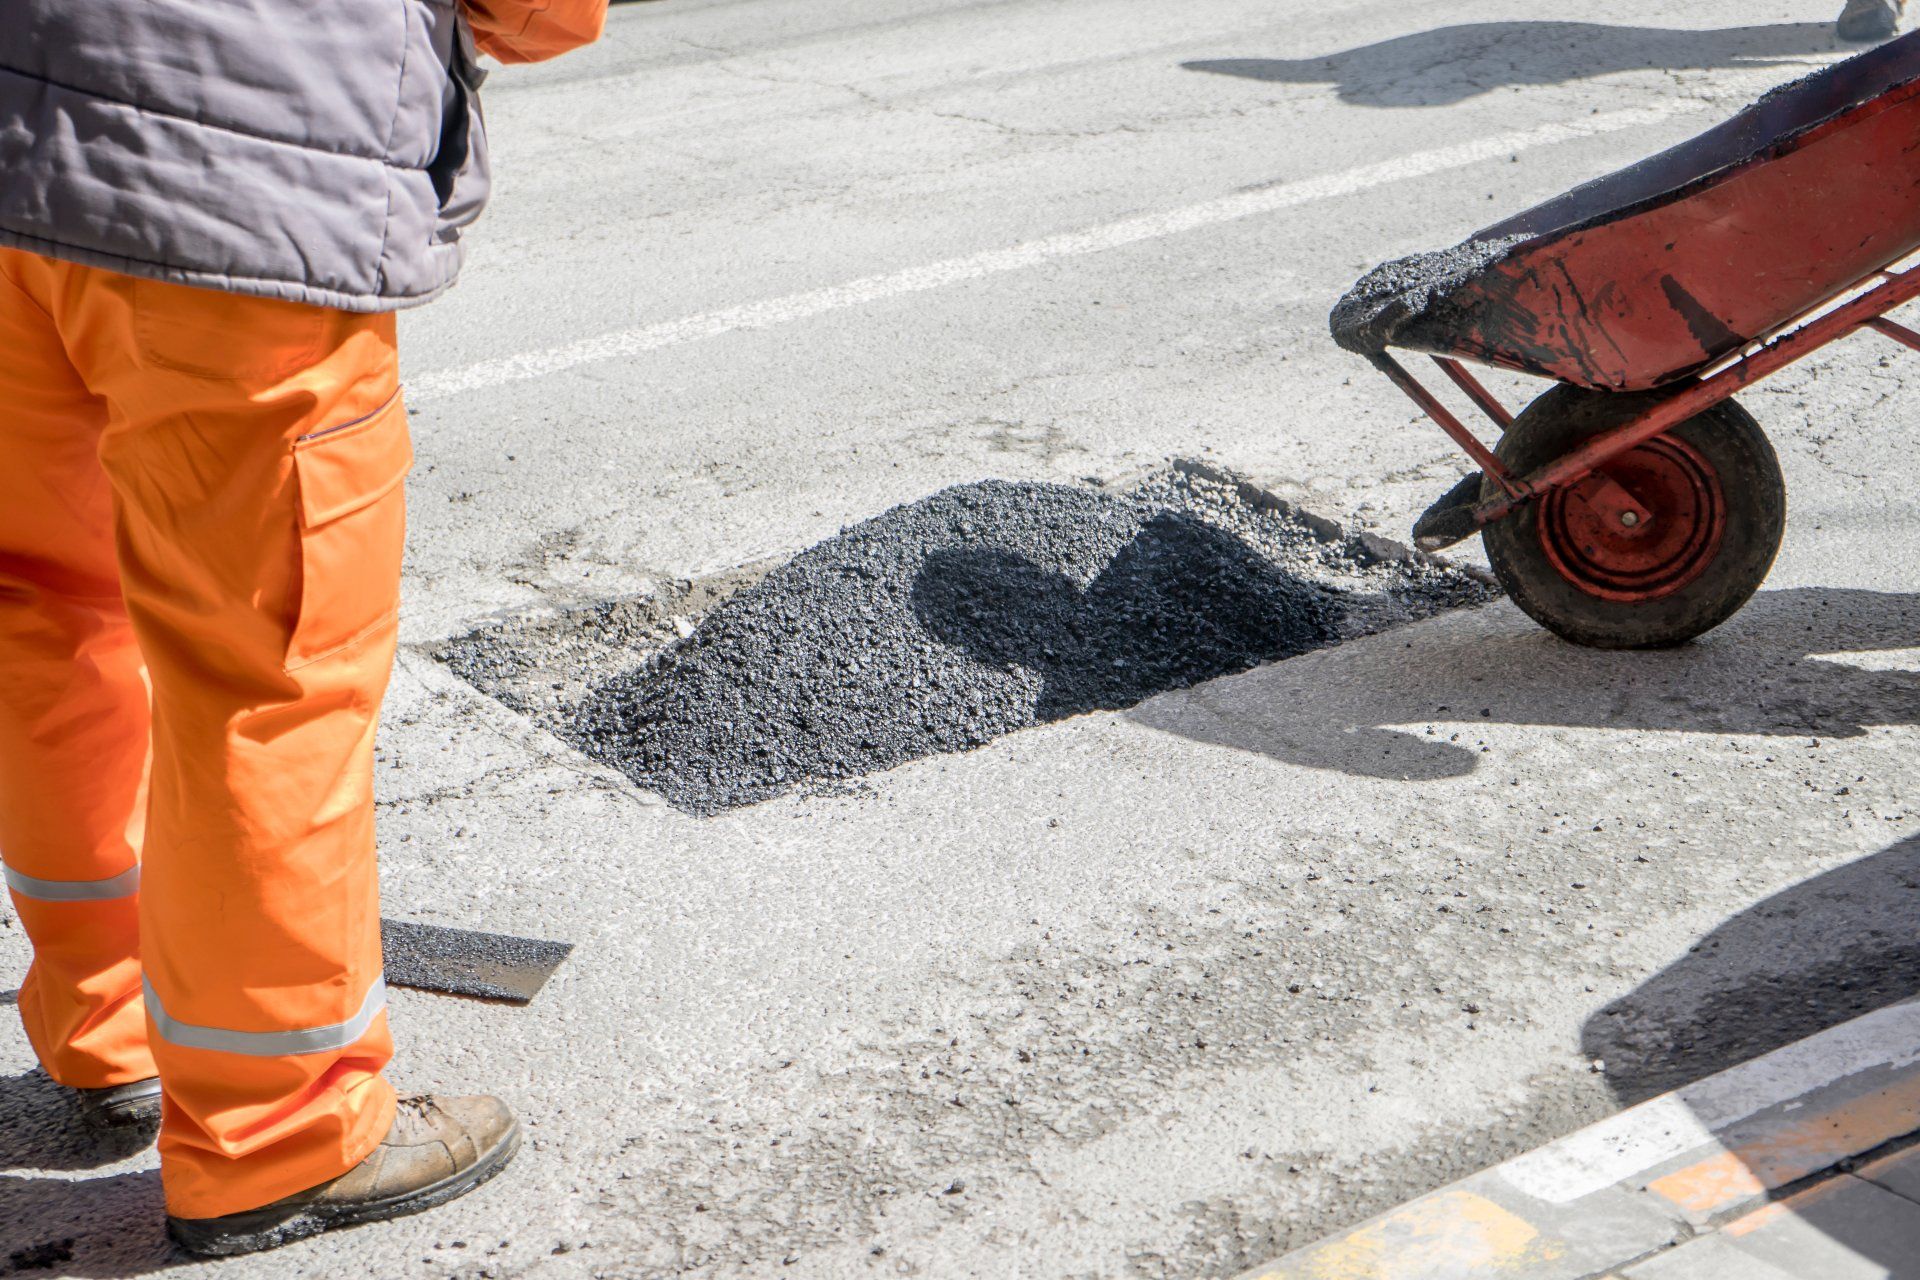 A pre-mixed asphalt is filled in the hole to avoid worsening conditions and the inconvenience it can cause.